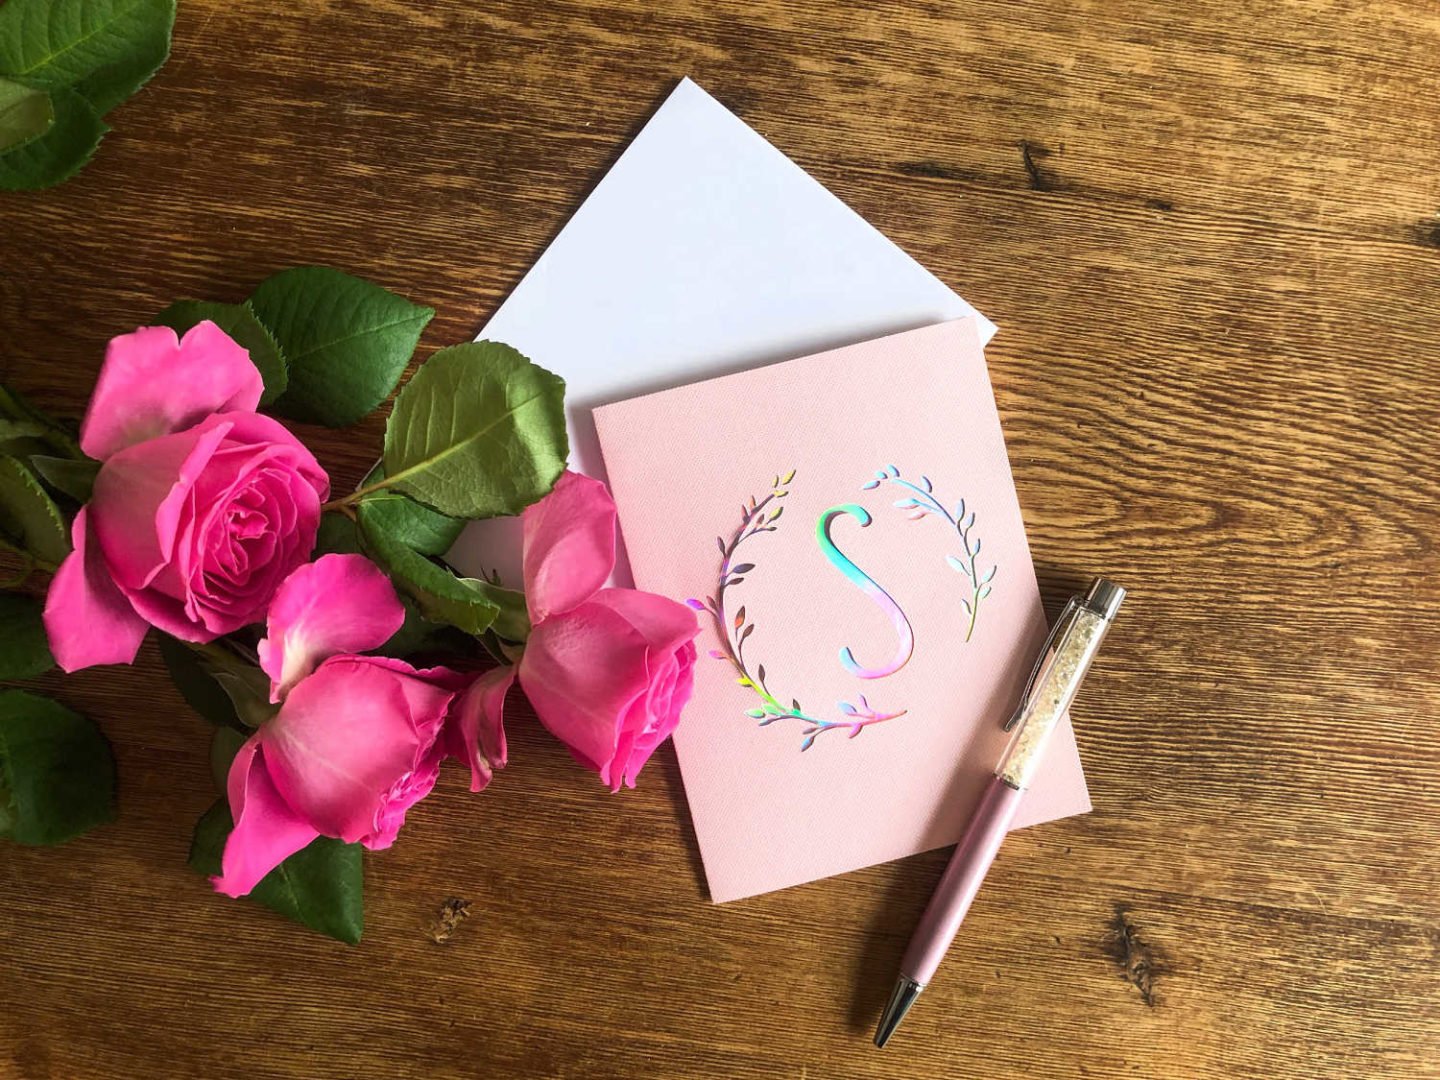 Making cards with monogram maker